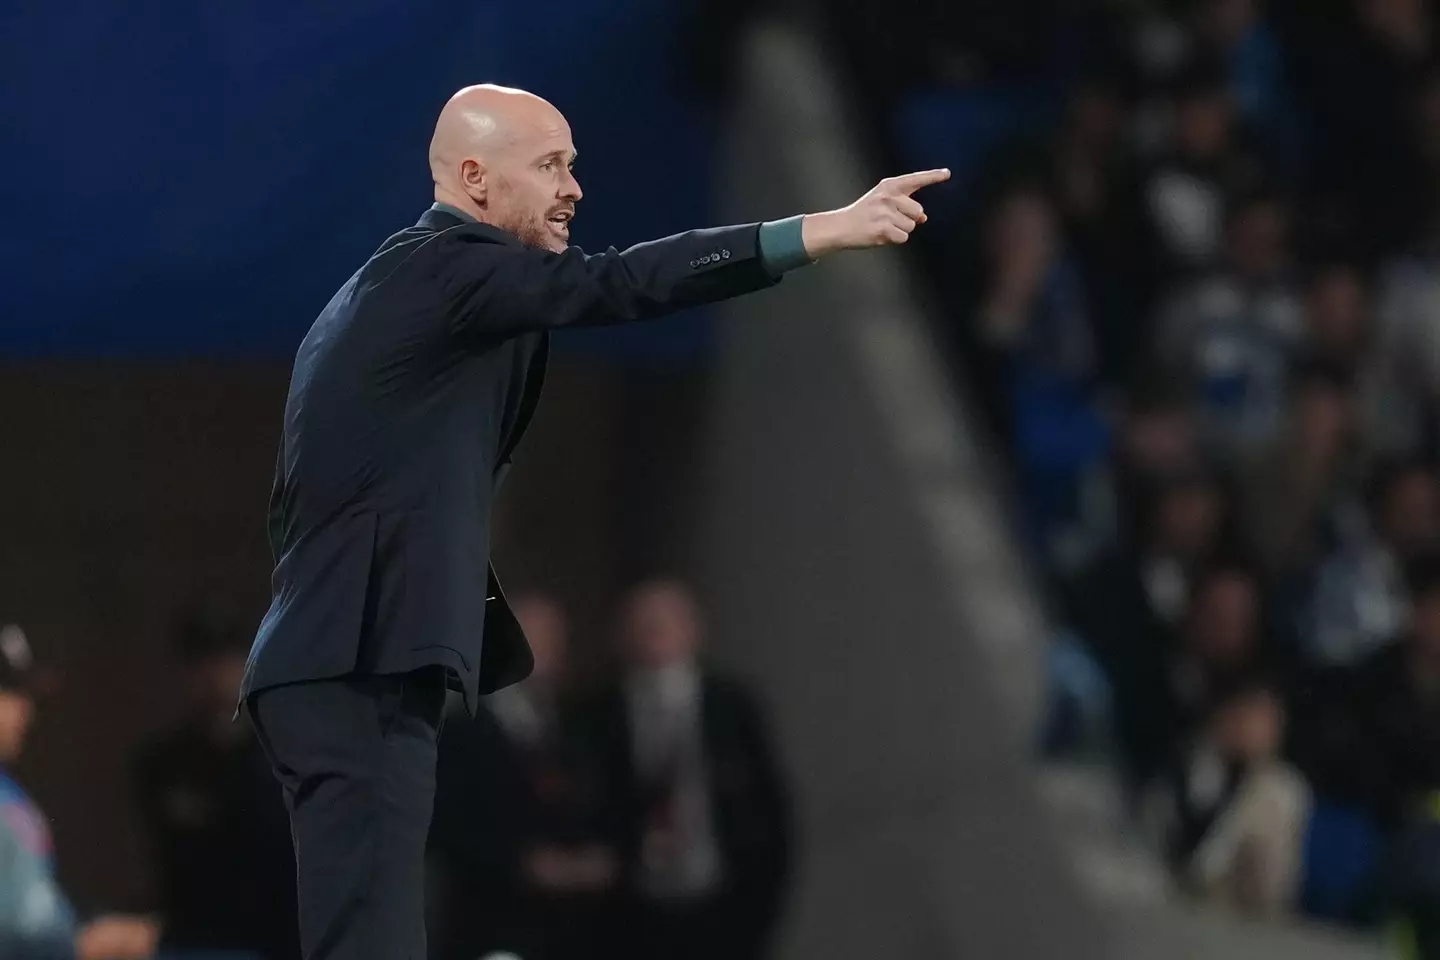 Ten Hag during United's 1-0 win over Real Sociedad on Thursday. (Image